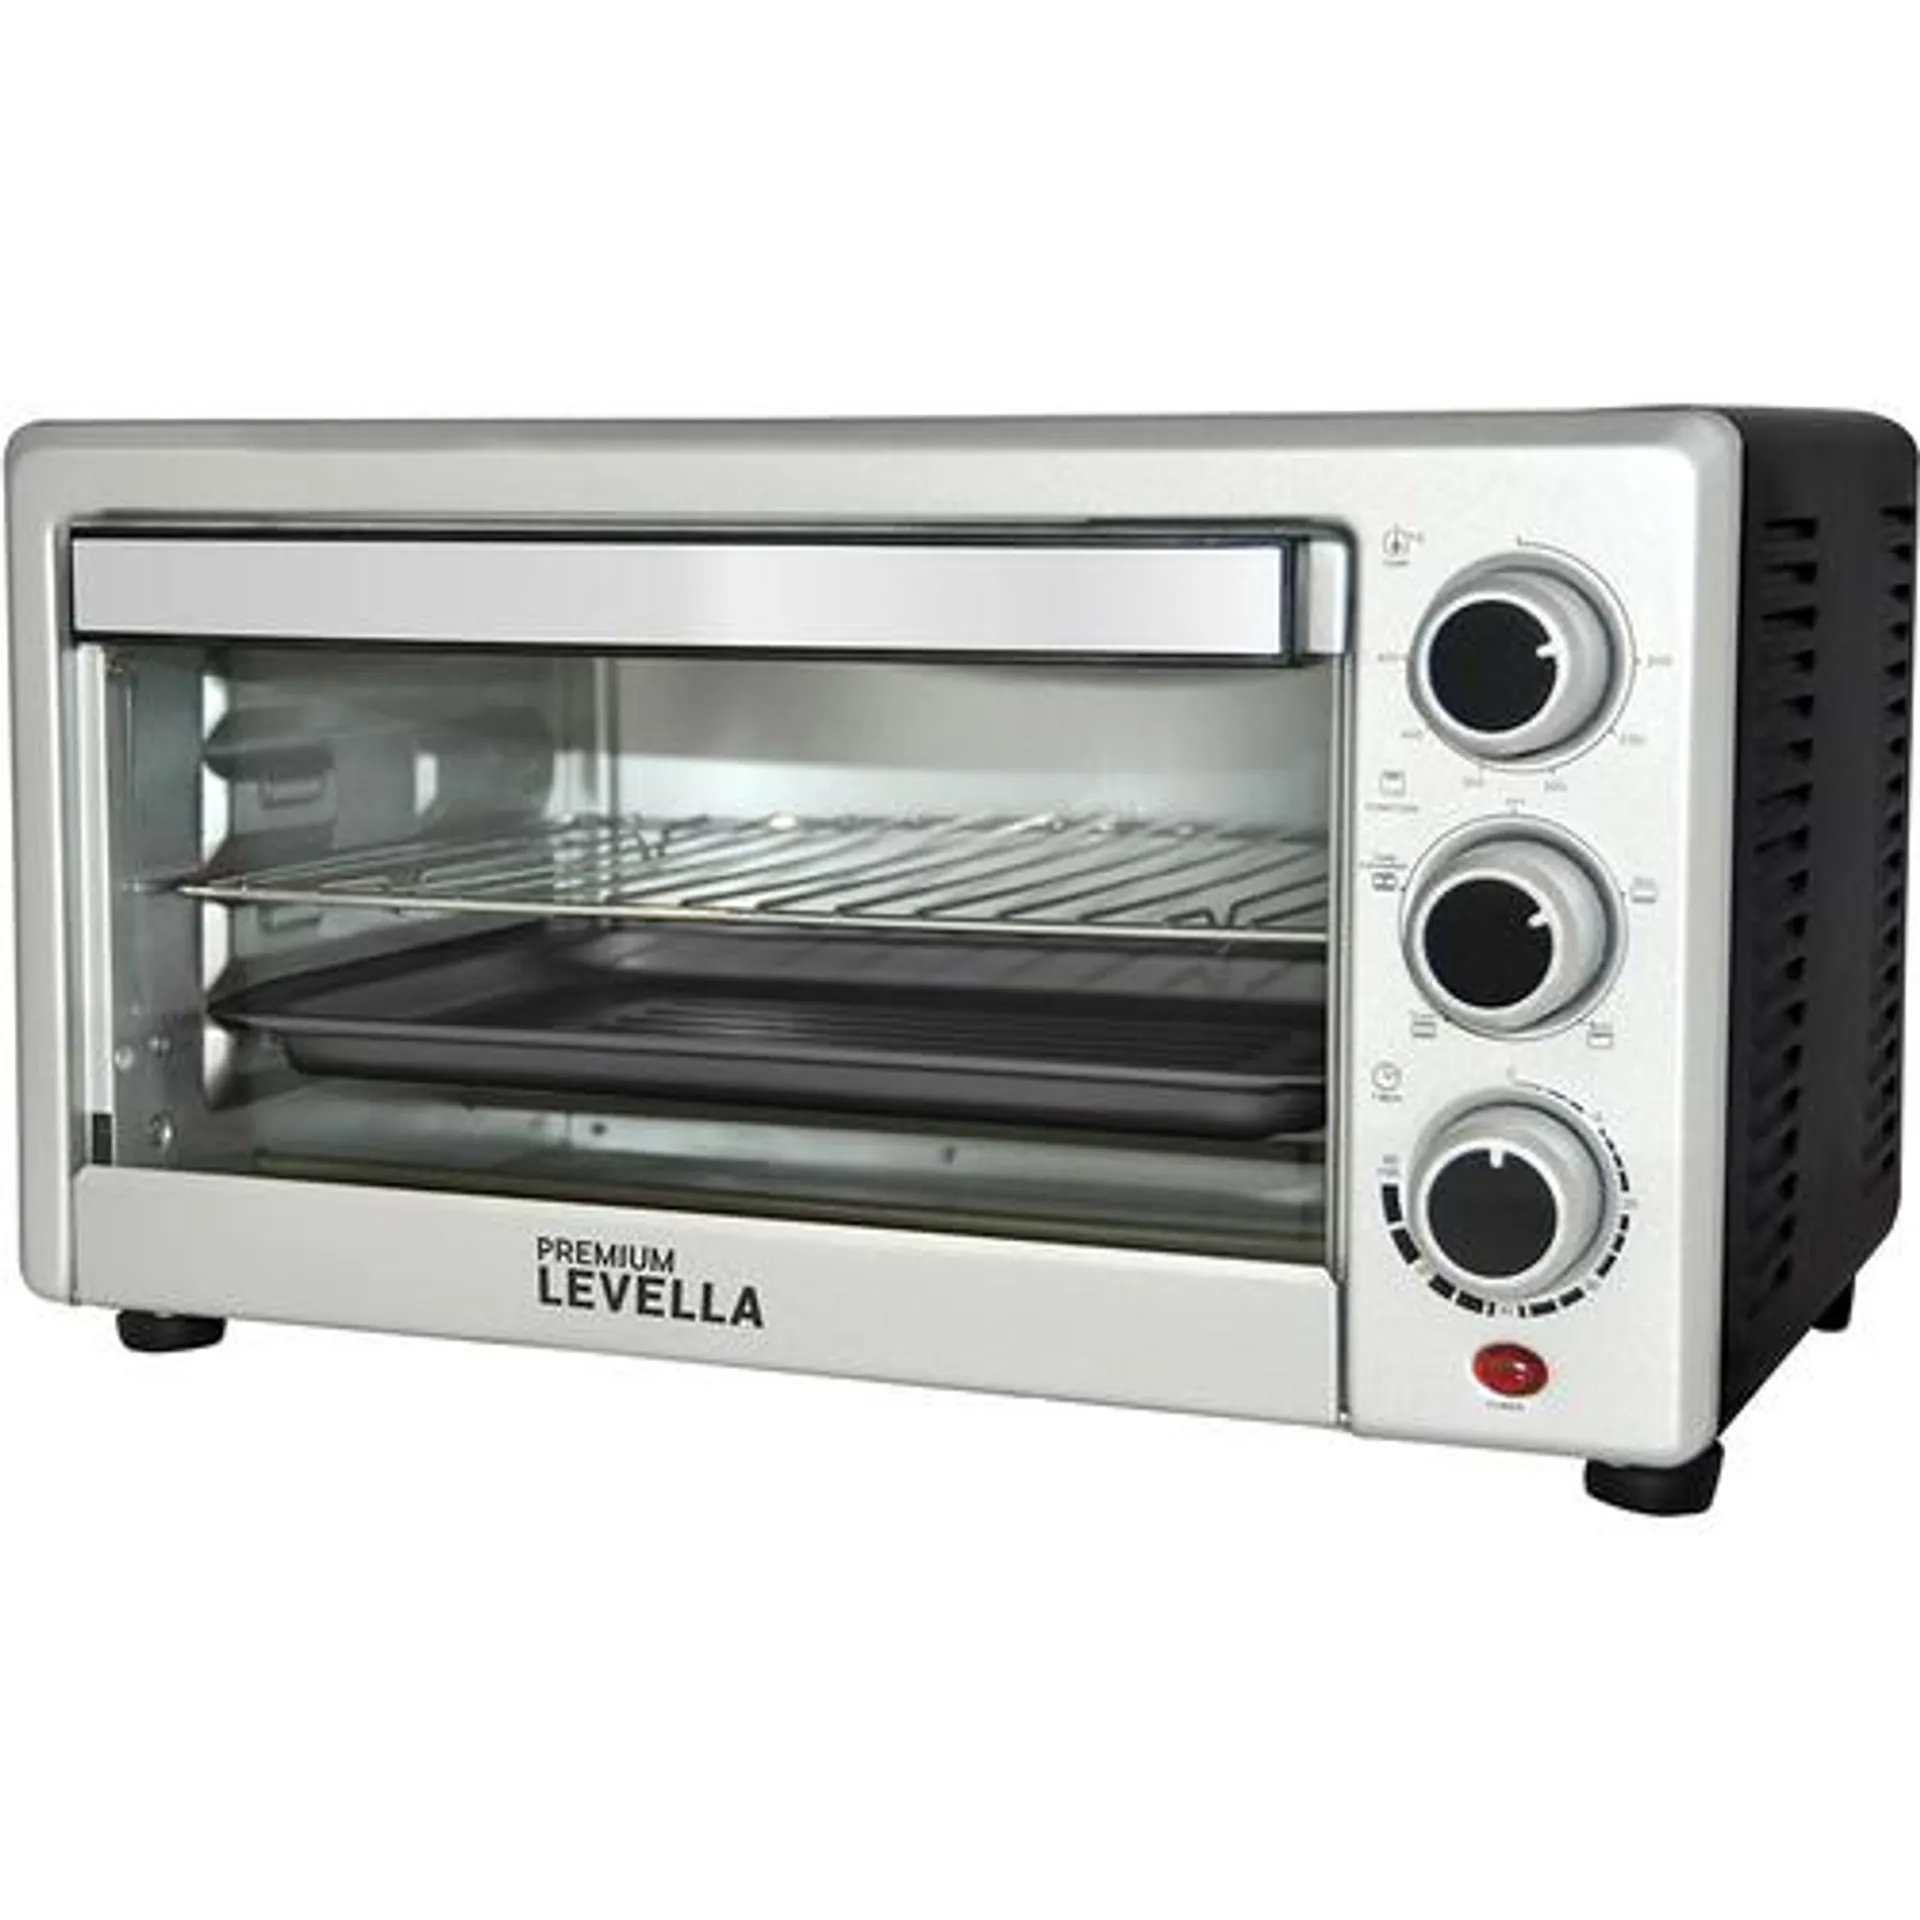 0.7 Cubic Foot 6-Slice Toaster Oven In Silver with Convection, Broil, Bake and Toast Functions